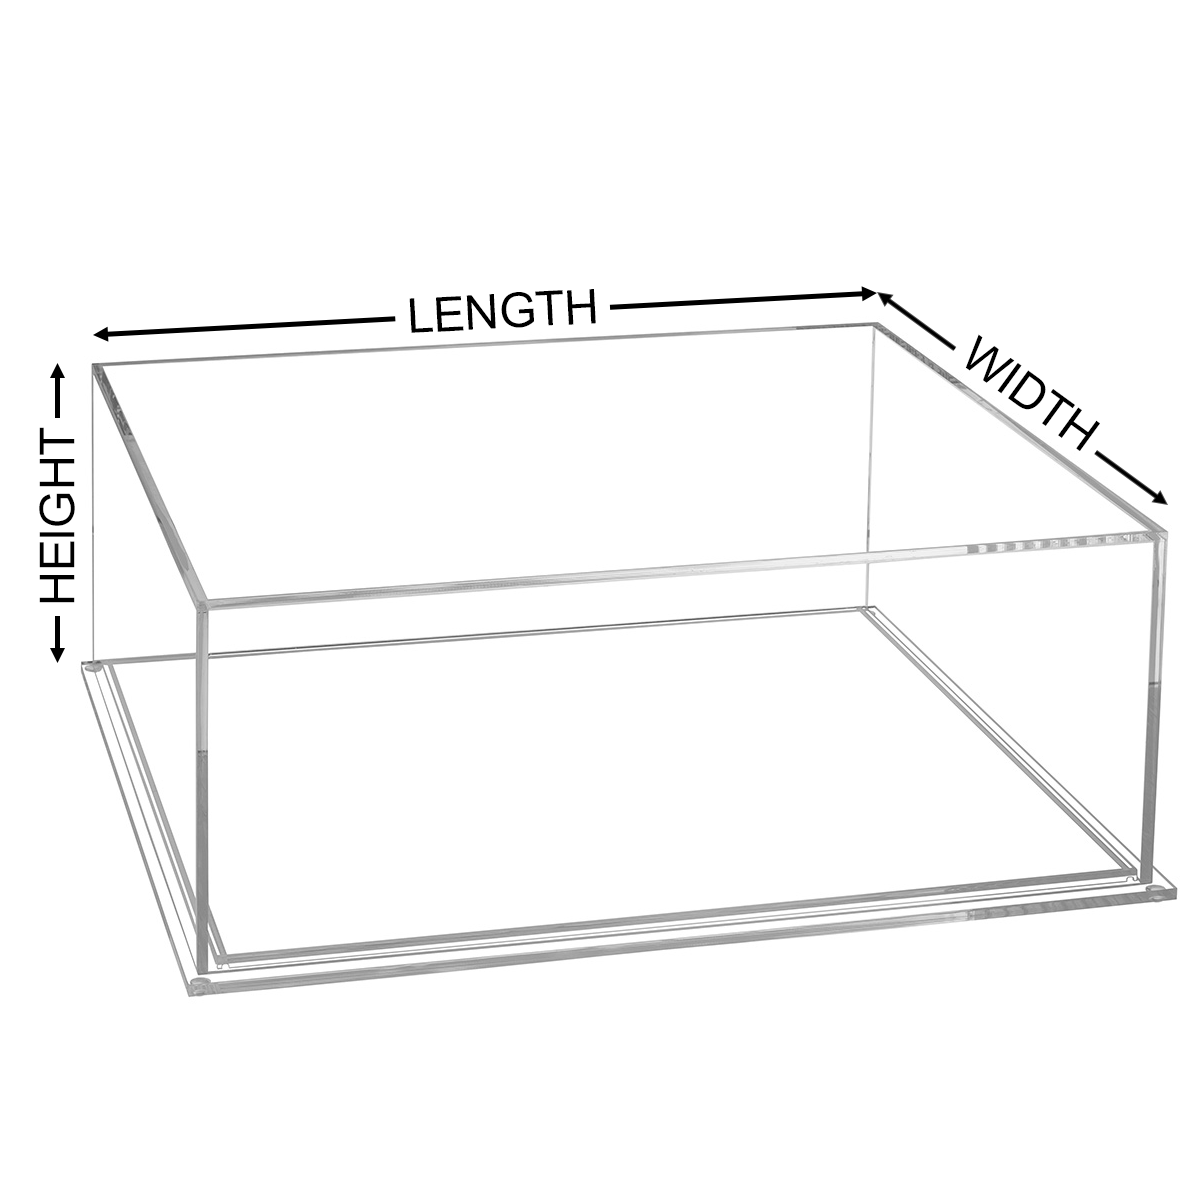 Details about   12.5" x 6.5" x 6.5" Clear Acrylic Display Box w BASE Showcase Store Hot Toys 1/6 